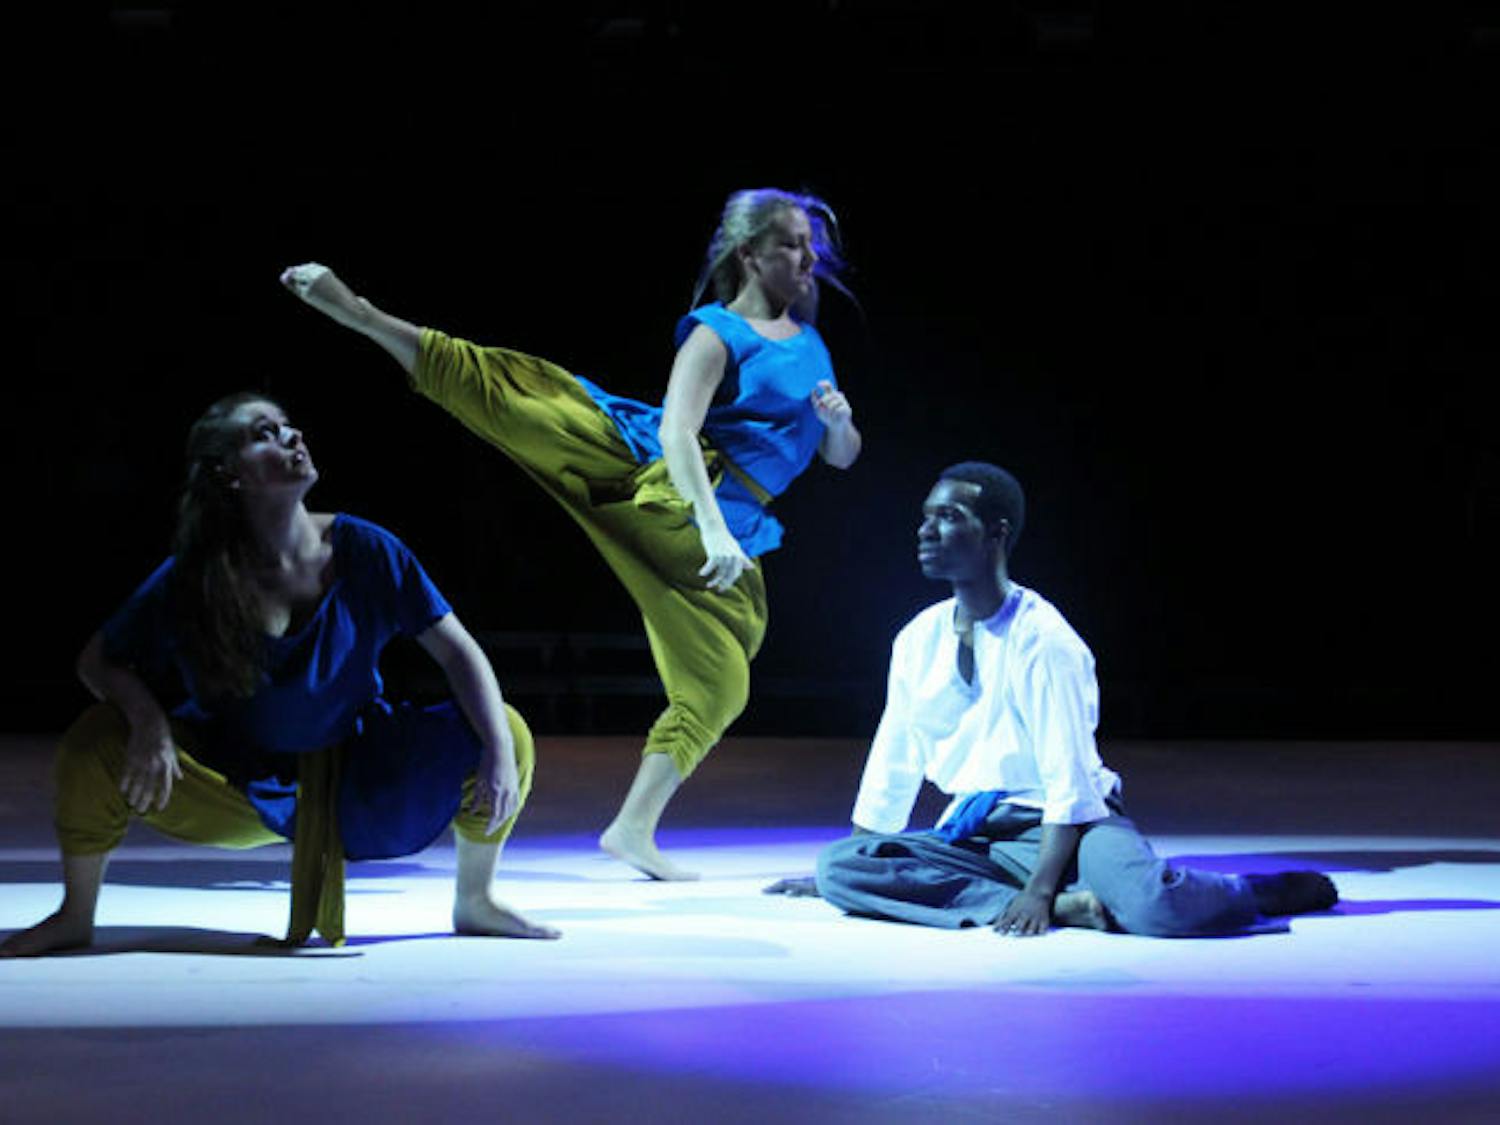 Lauren Hoefer, 20, Channing Malz, 20, and Cornelius Pride, 24, rehearse a dance for “Dance 2013: Drop” in the Nadine Mcguire Black Box Theatre&nbsp;on Wednesday night. “Dance 2013: Drop” premieres today at 7:30 p.m. and runs until Feb. 24. Tickets are available at the University Box Office.